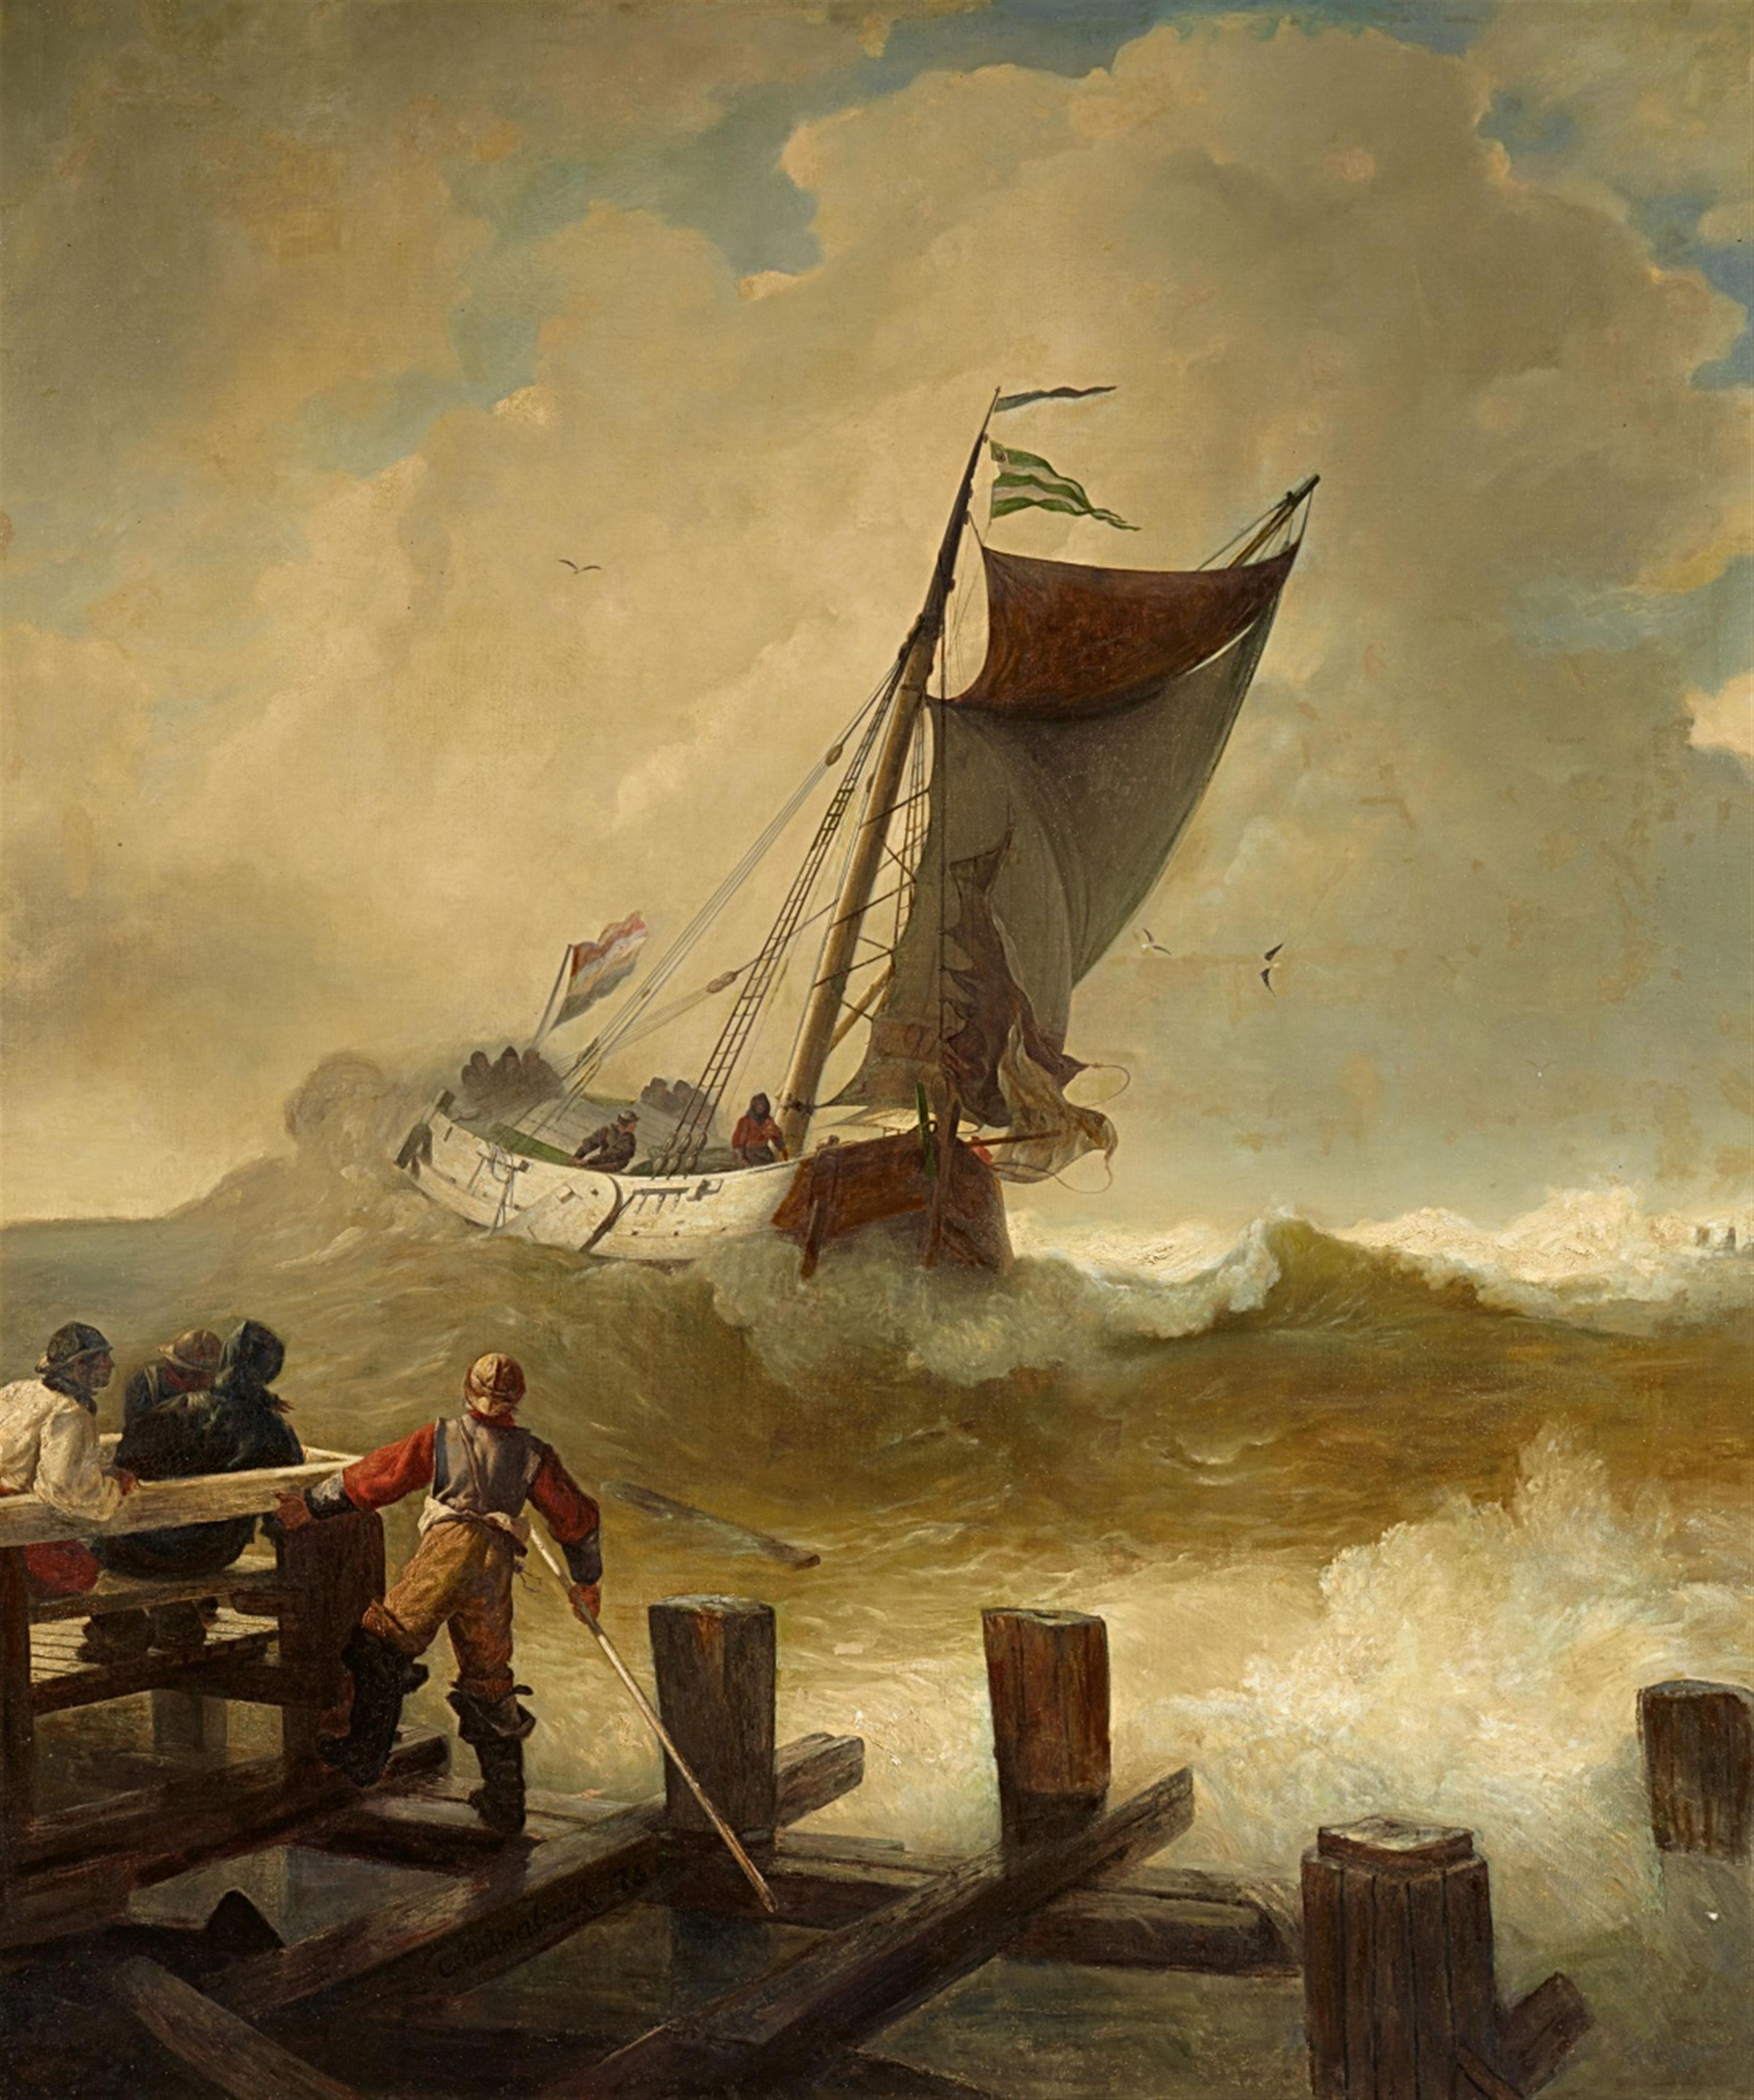 Andreas Achenbach - A Fishing Boat on Rough Seas - image-1